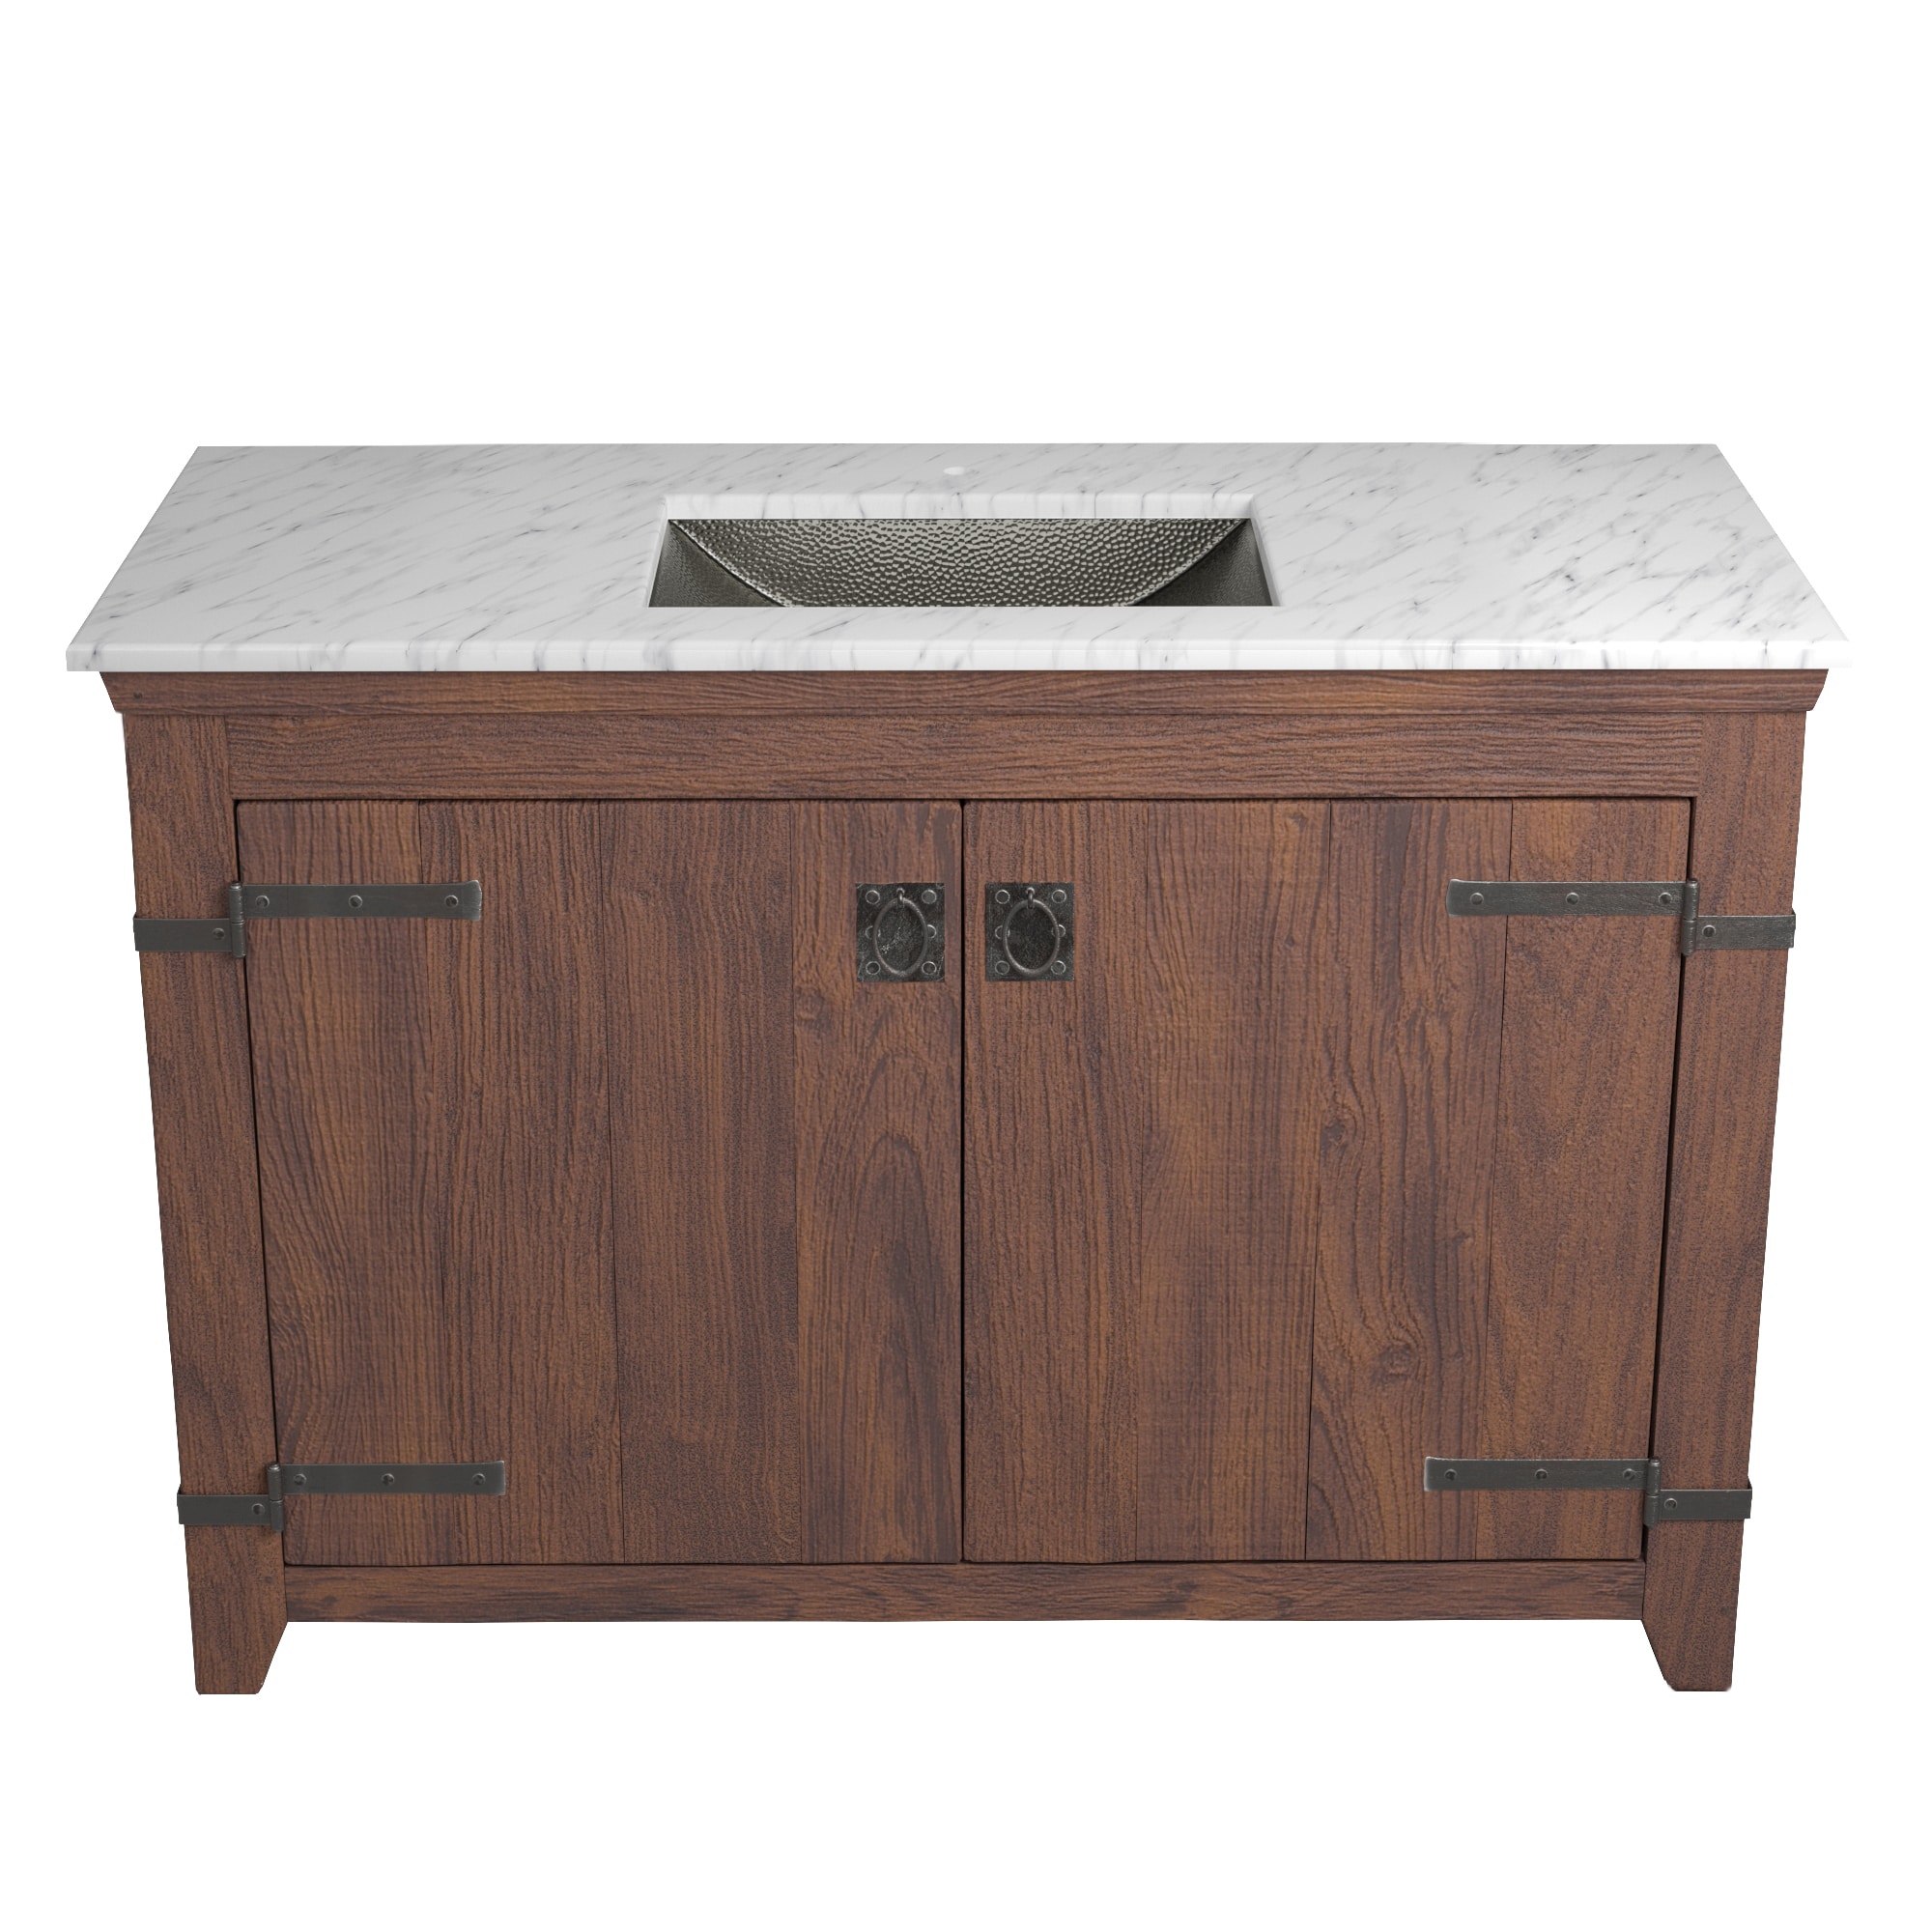 Native Trails 48" Americana Vanity in Chestnut with Carrara Marble Top and Avila in Polished Nickel, Single Faucet Hole, BND48-VB-CT-CP-027